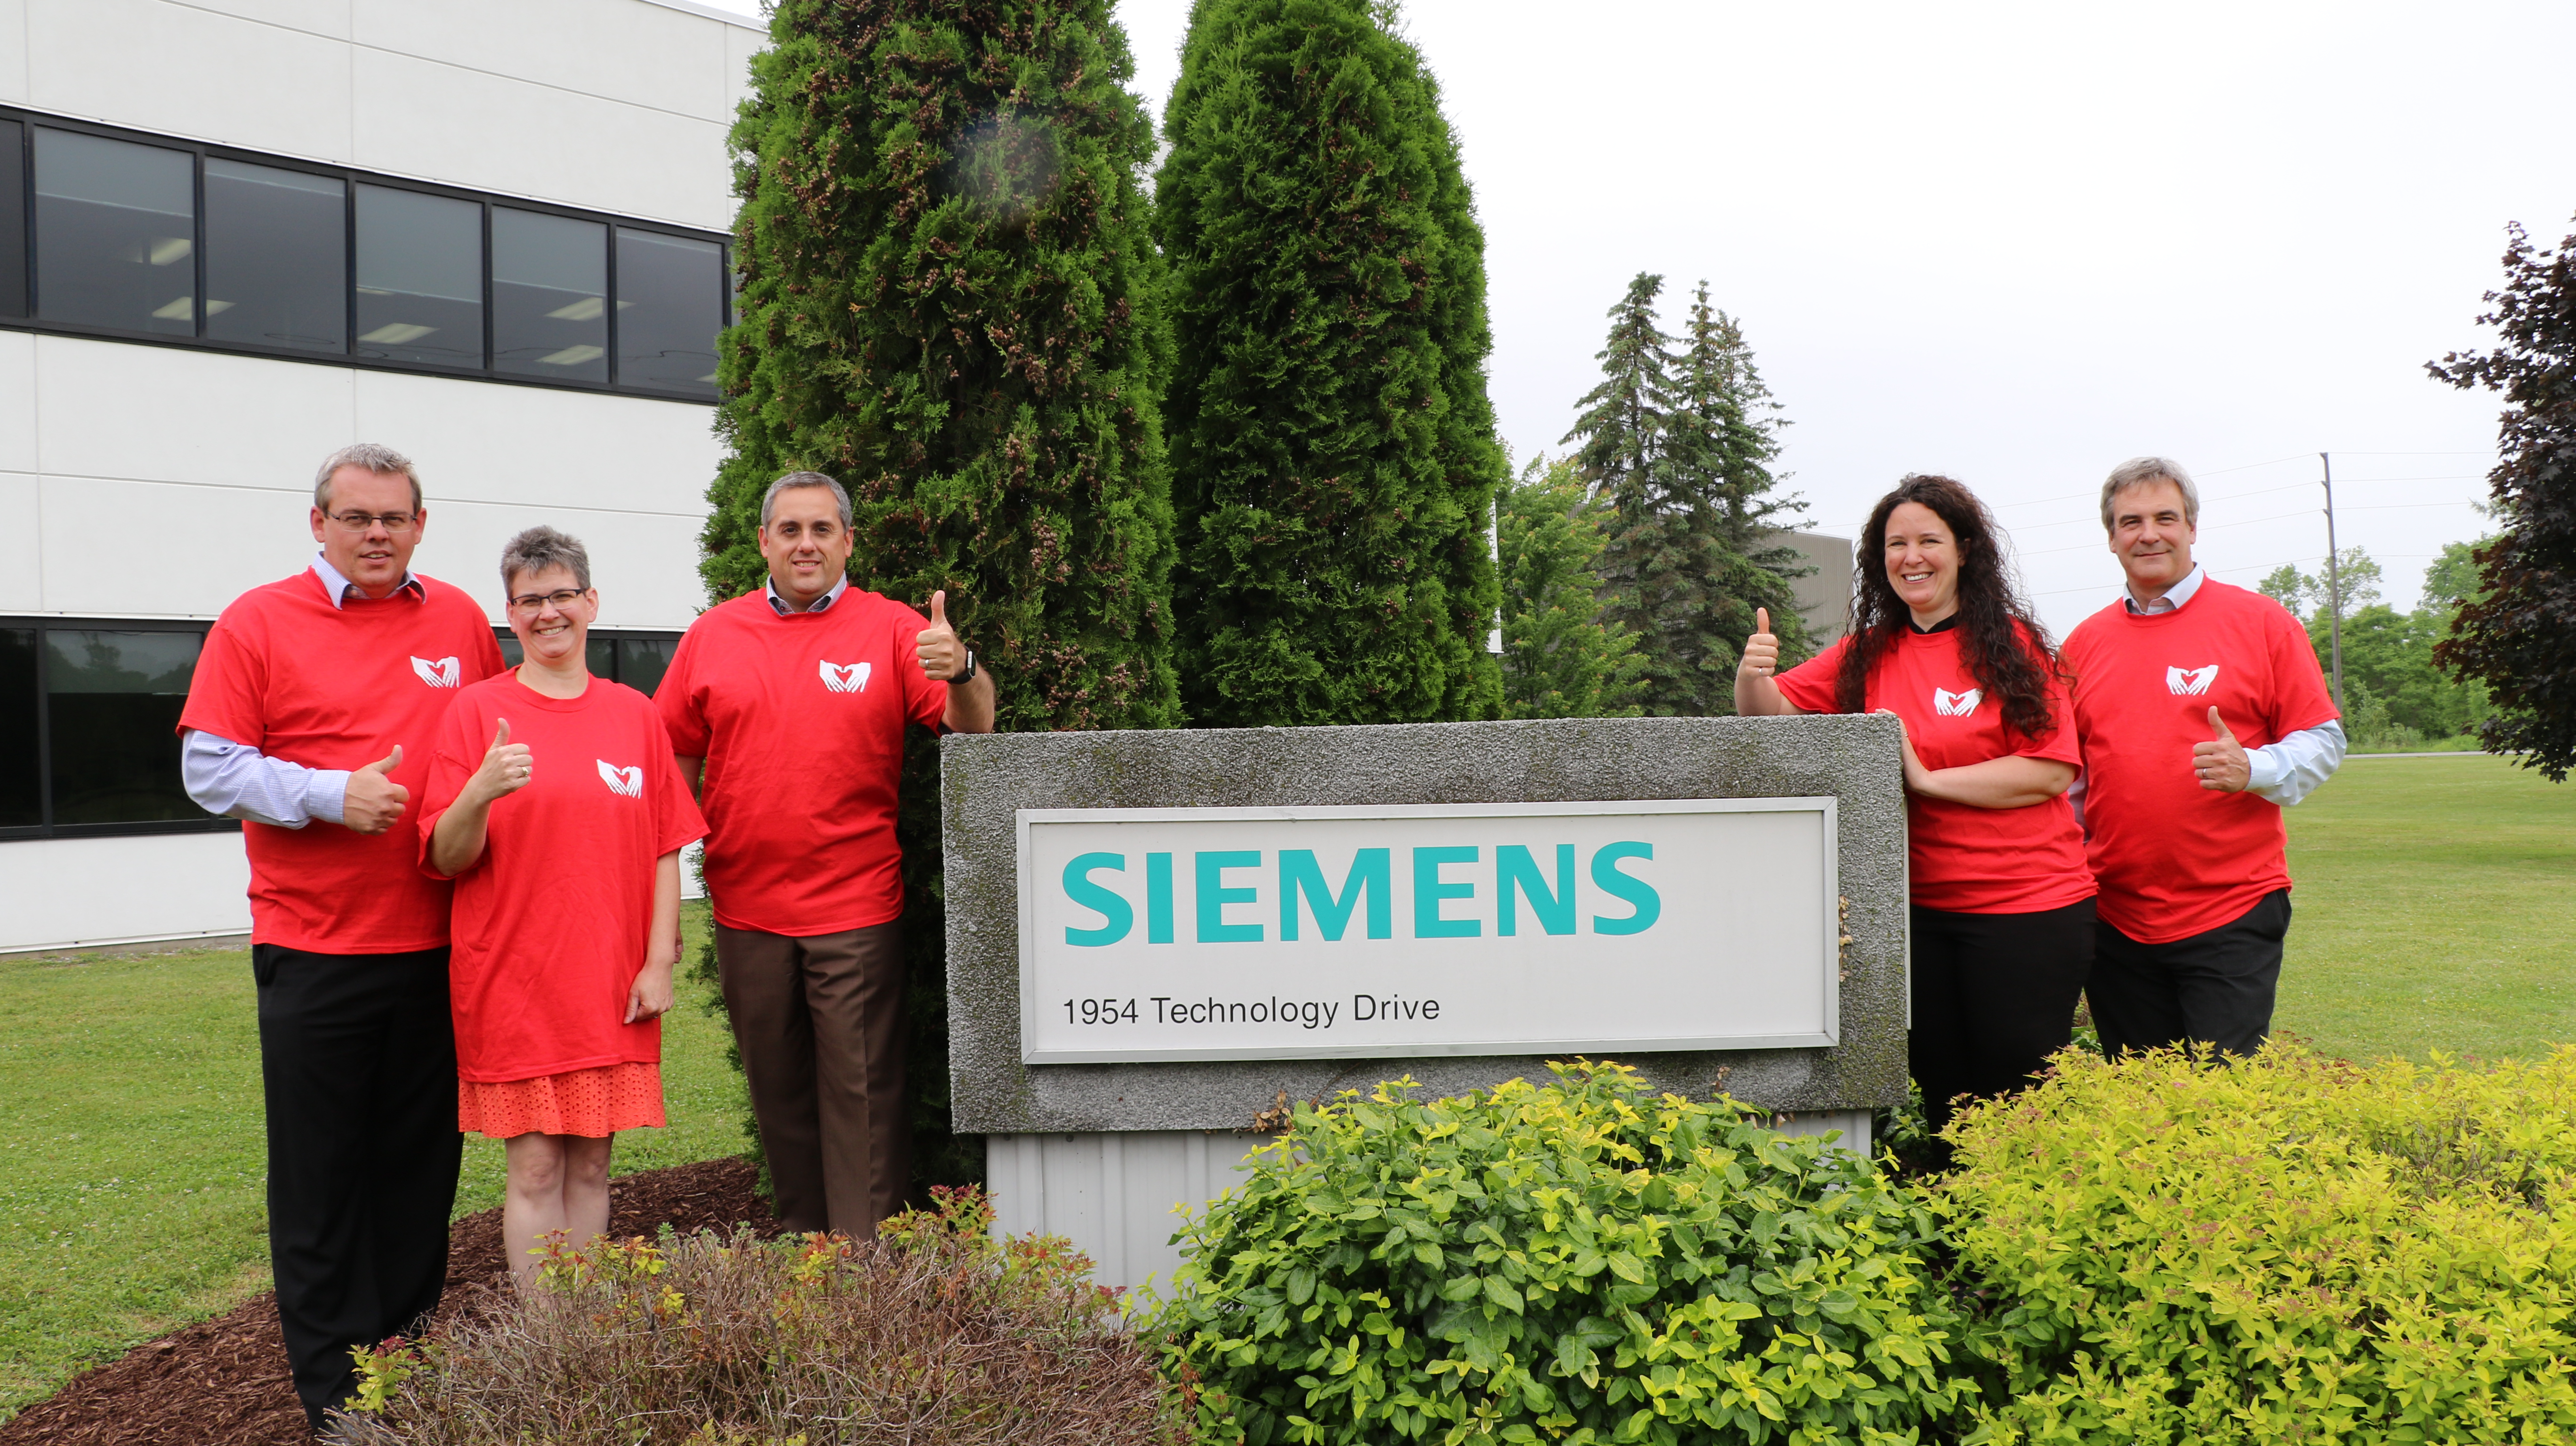 Siemens Peterborough staff pose in front of their company sign